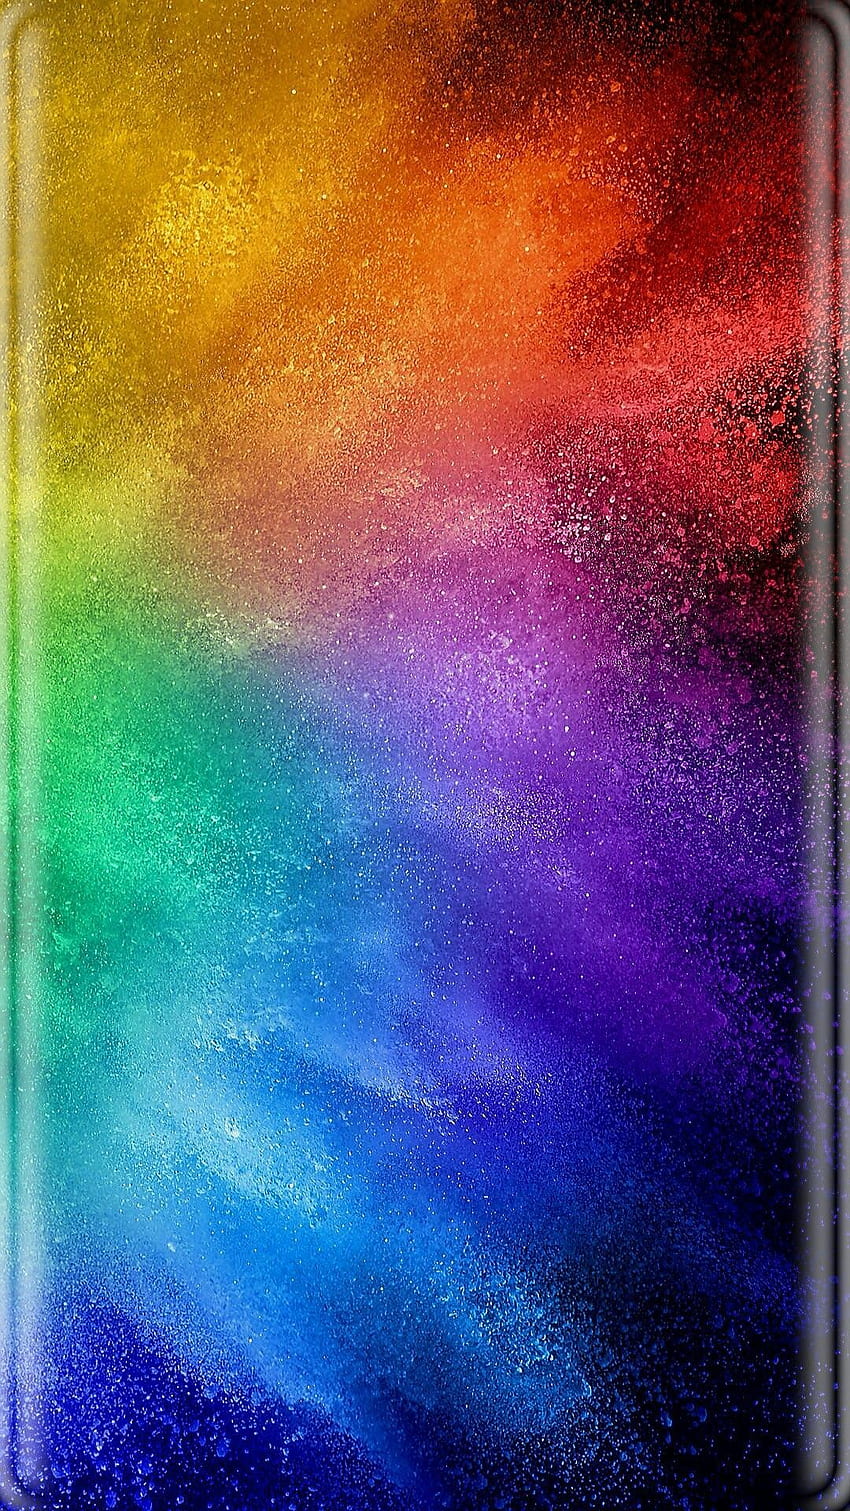 7 Pride Wallpaper Ideas for iPhones and Phones  Rainbow on Peach Backgroud  1  Fab Mood  Wedding Colours Wedding Themes Wedding colour palettes